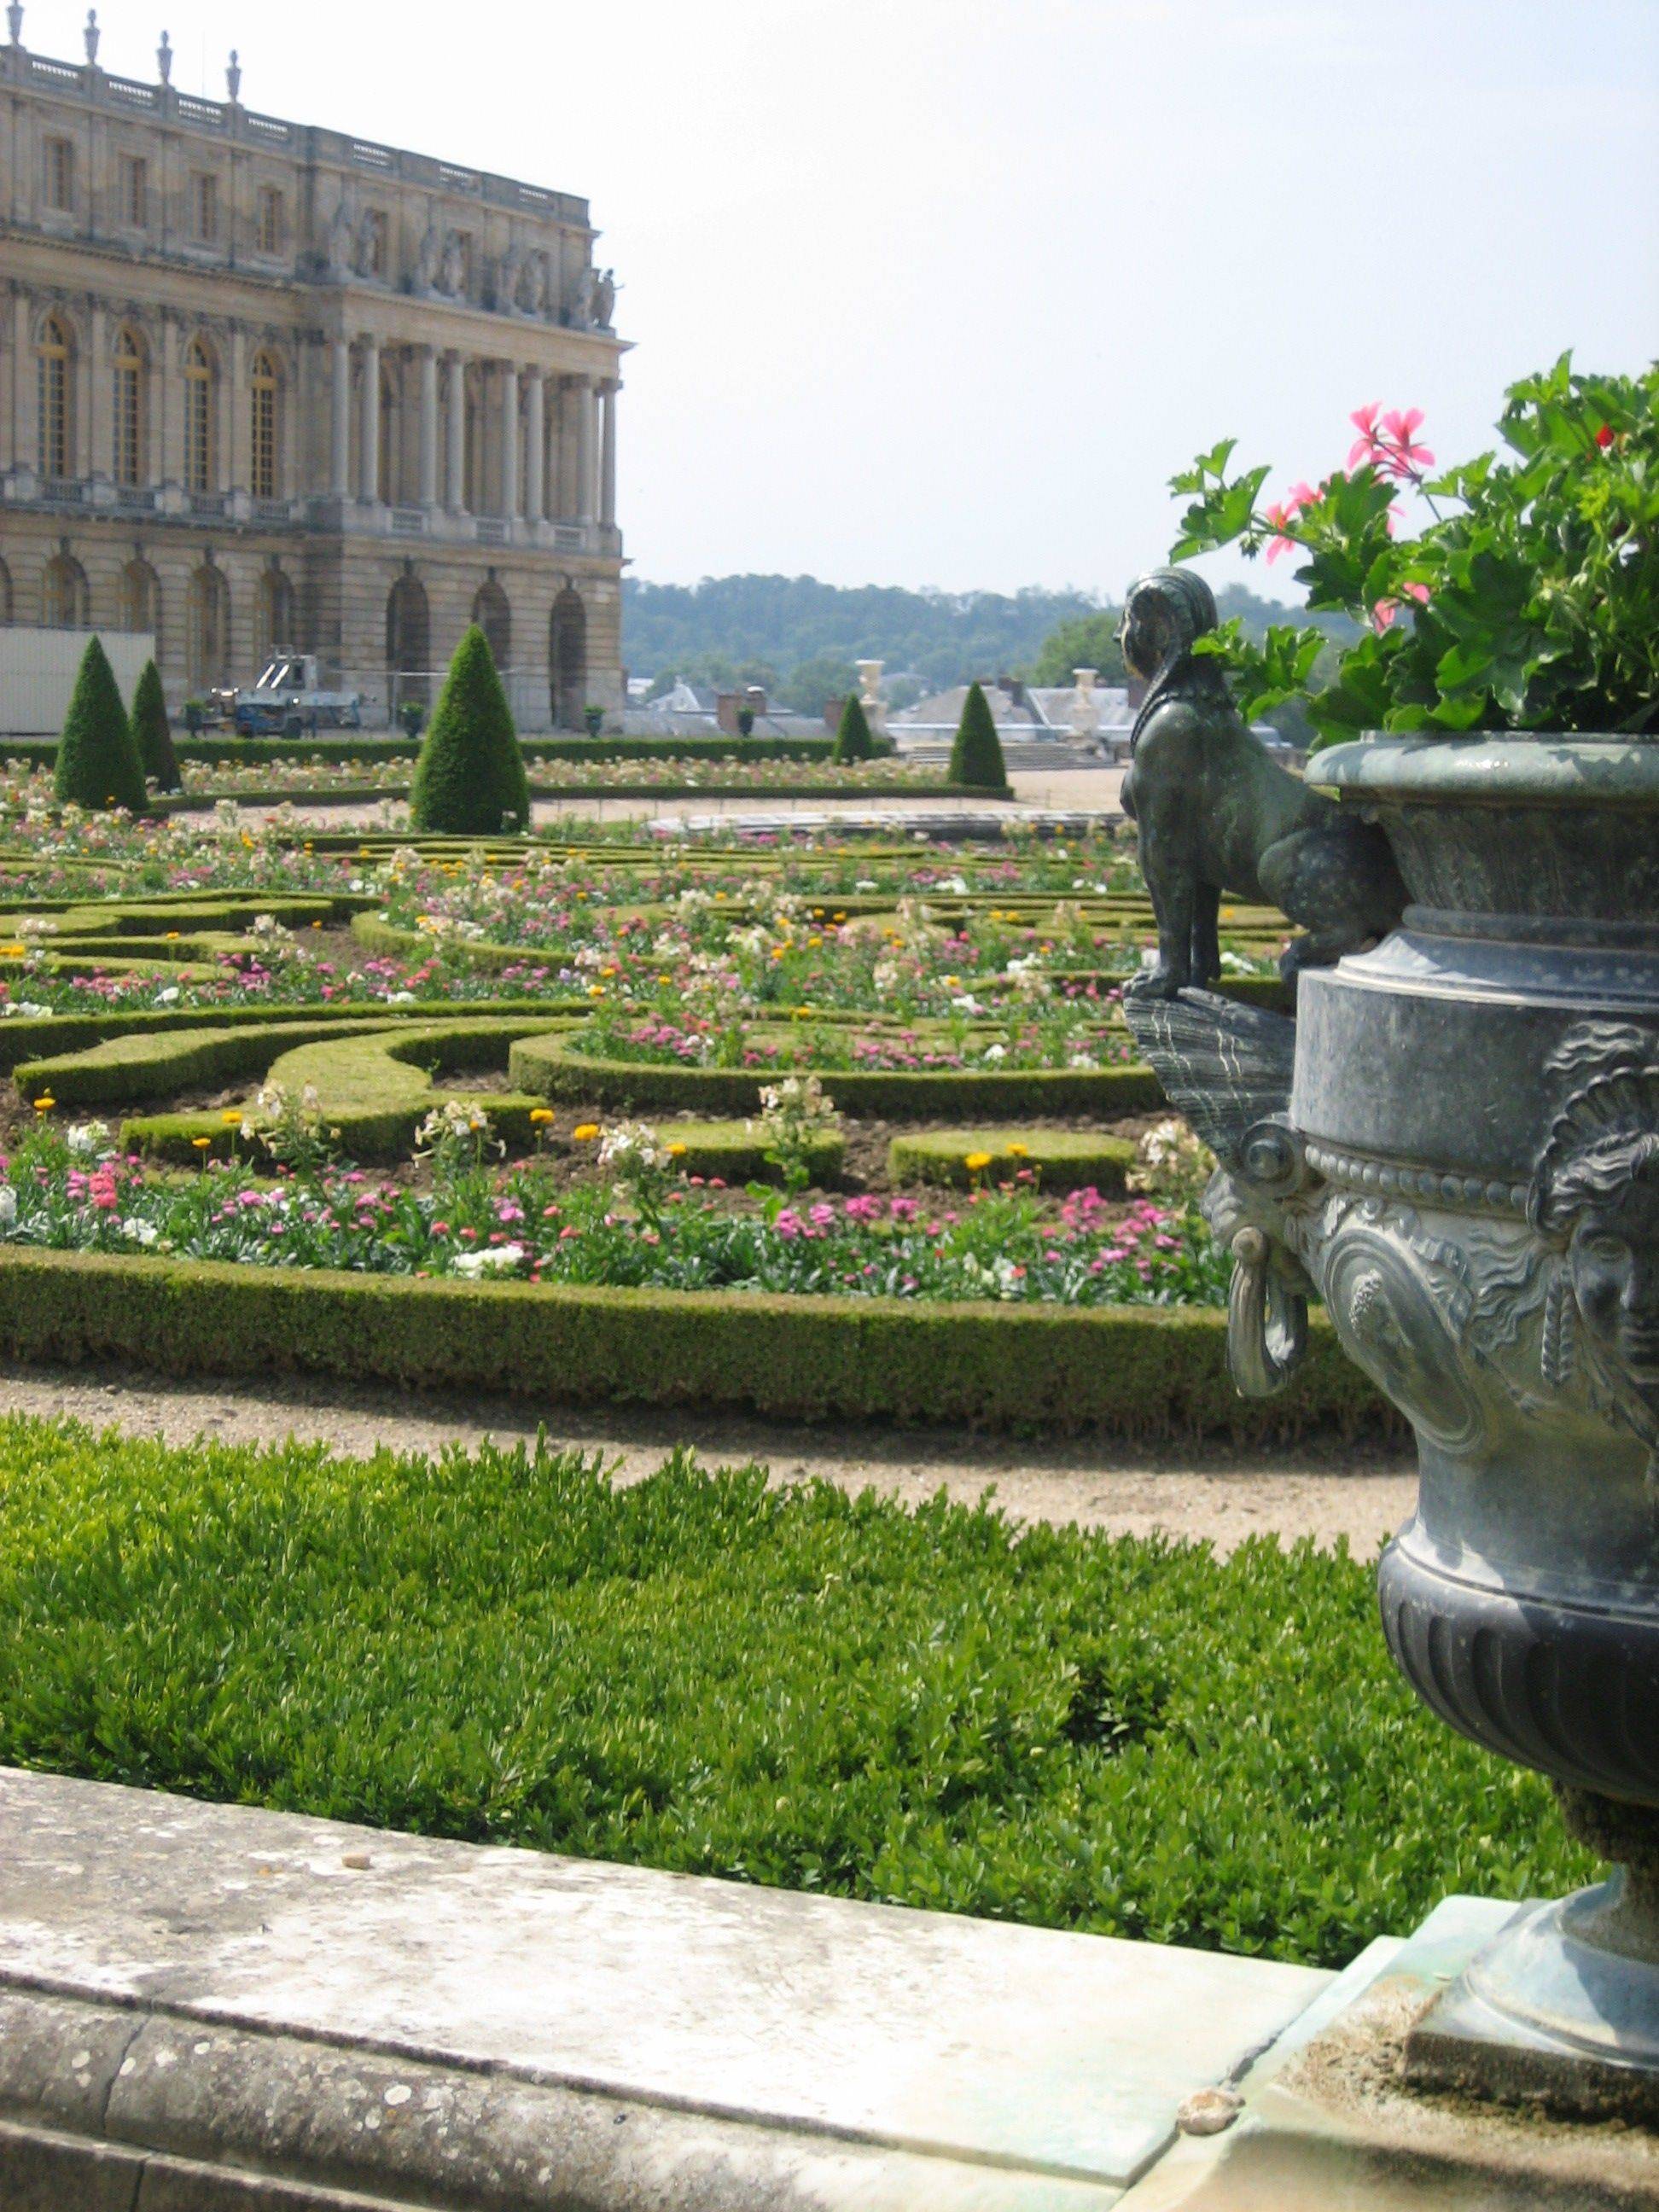 The Petit Trianon Palace